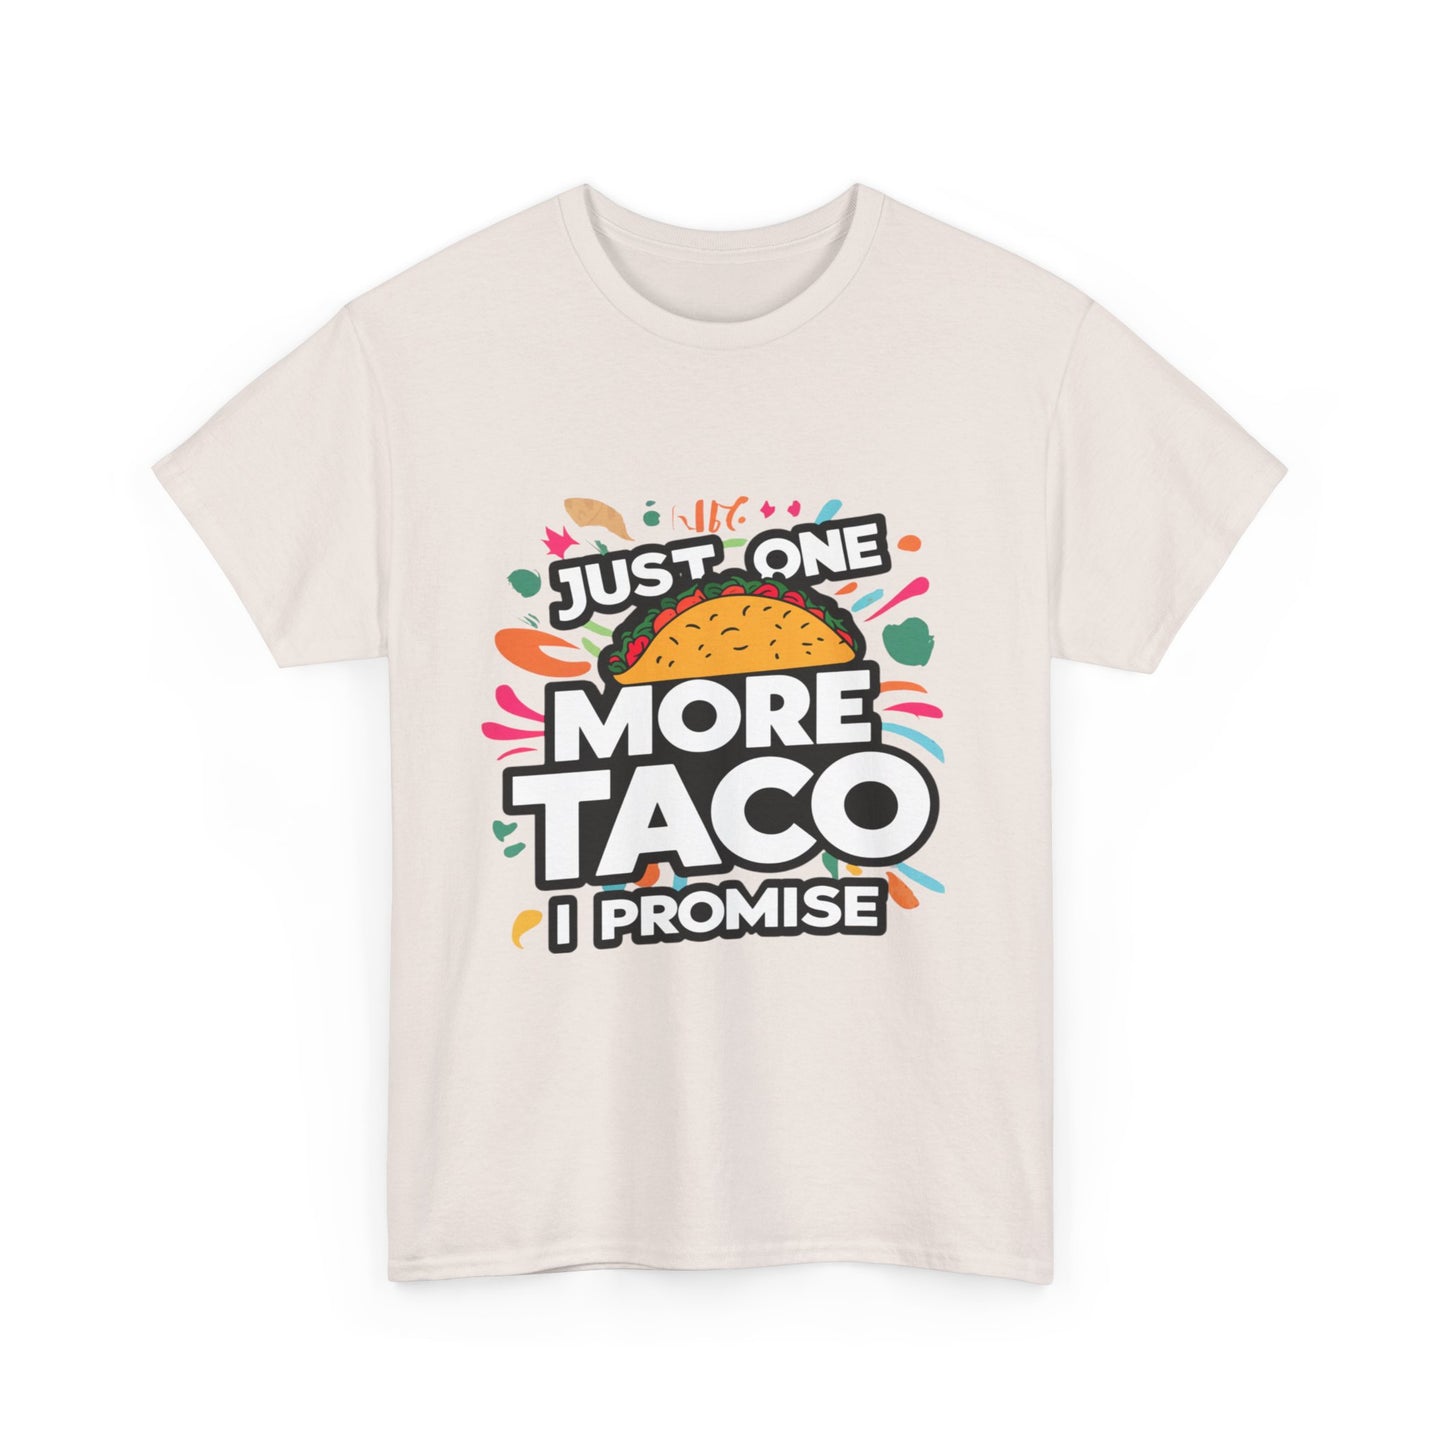 Just One More Taco I Promise Mexican Food Graphic Unisex Heavy Cotton Tee Cotton Funny Humorous Graphic Soft Premium Unisex Men Women Ice Gray T-shirt Birthday Gift-48